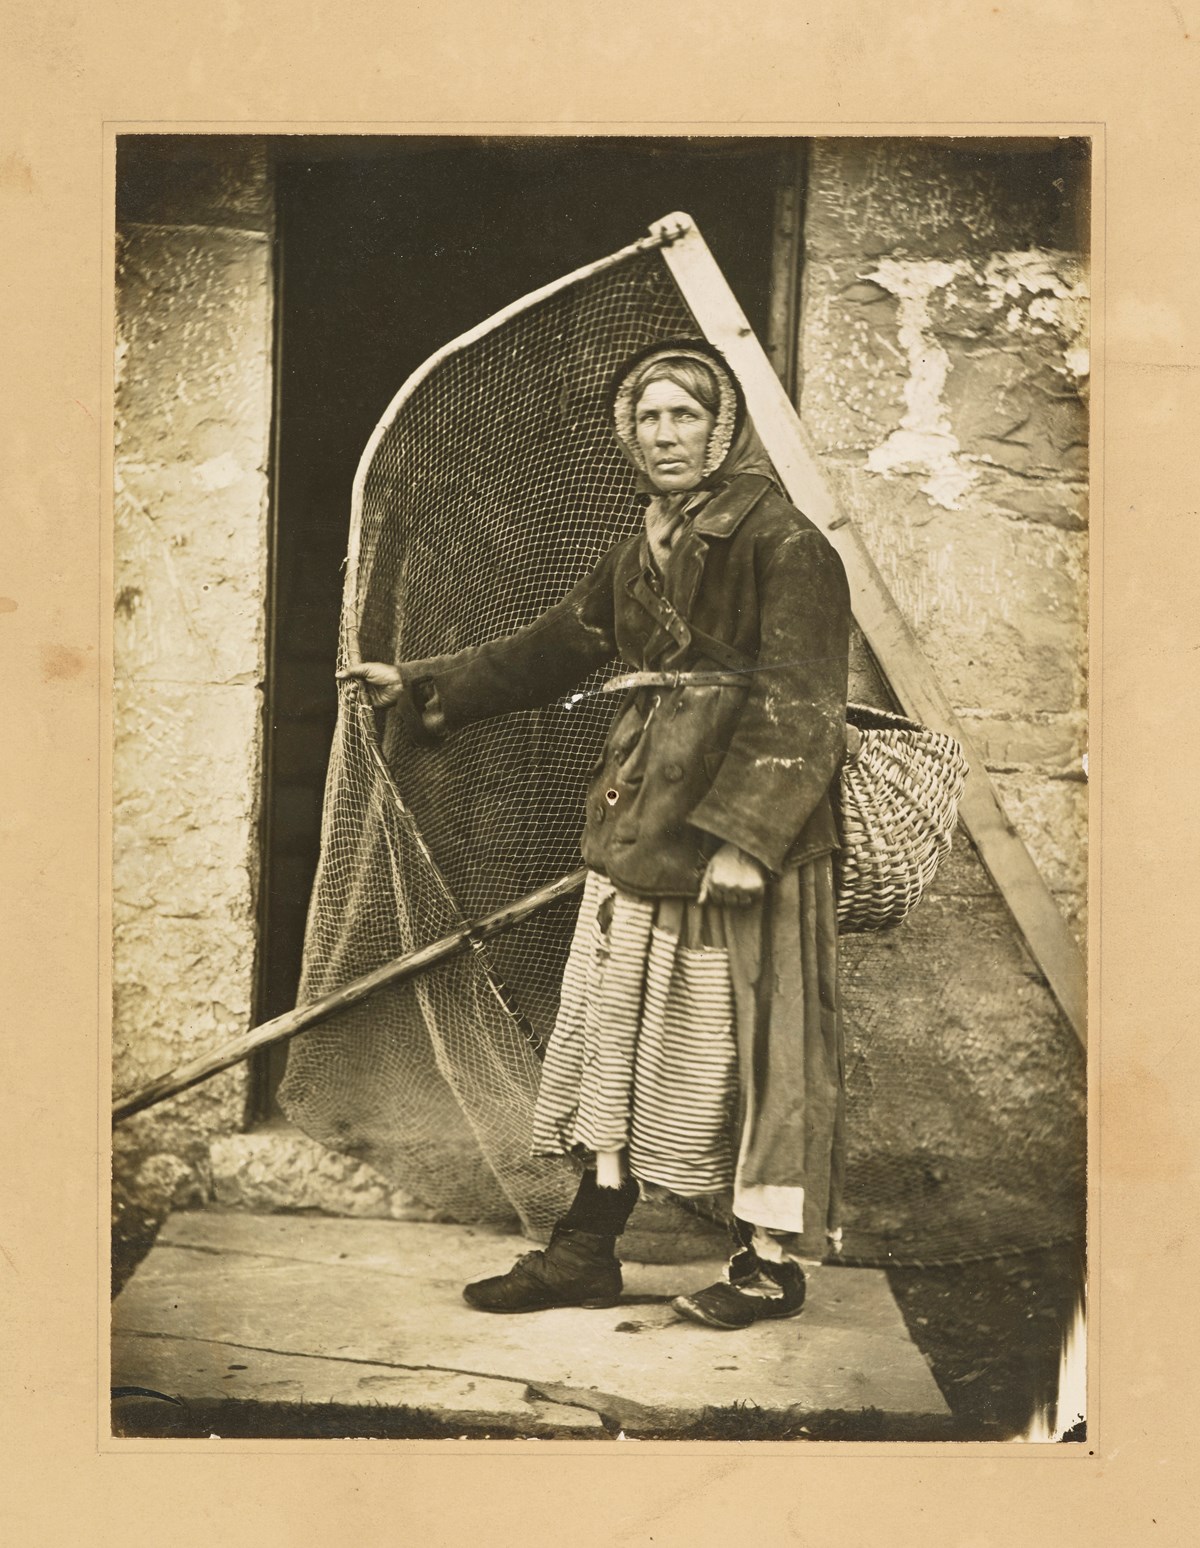 Unknown photographer
Fish wife with net , 1890s 
Albumen print 
Collection: National Library of Scotland, MacKinnon Collection, acquired jointly with the National Galleries of Scotland with assistance from the National Lottery Heritage Fund, the Scottish Government and Art Fund